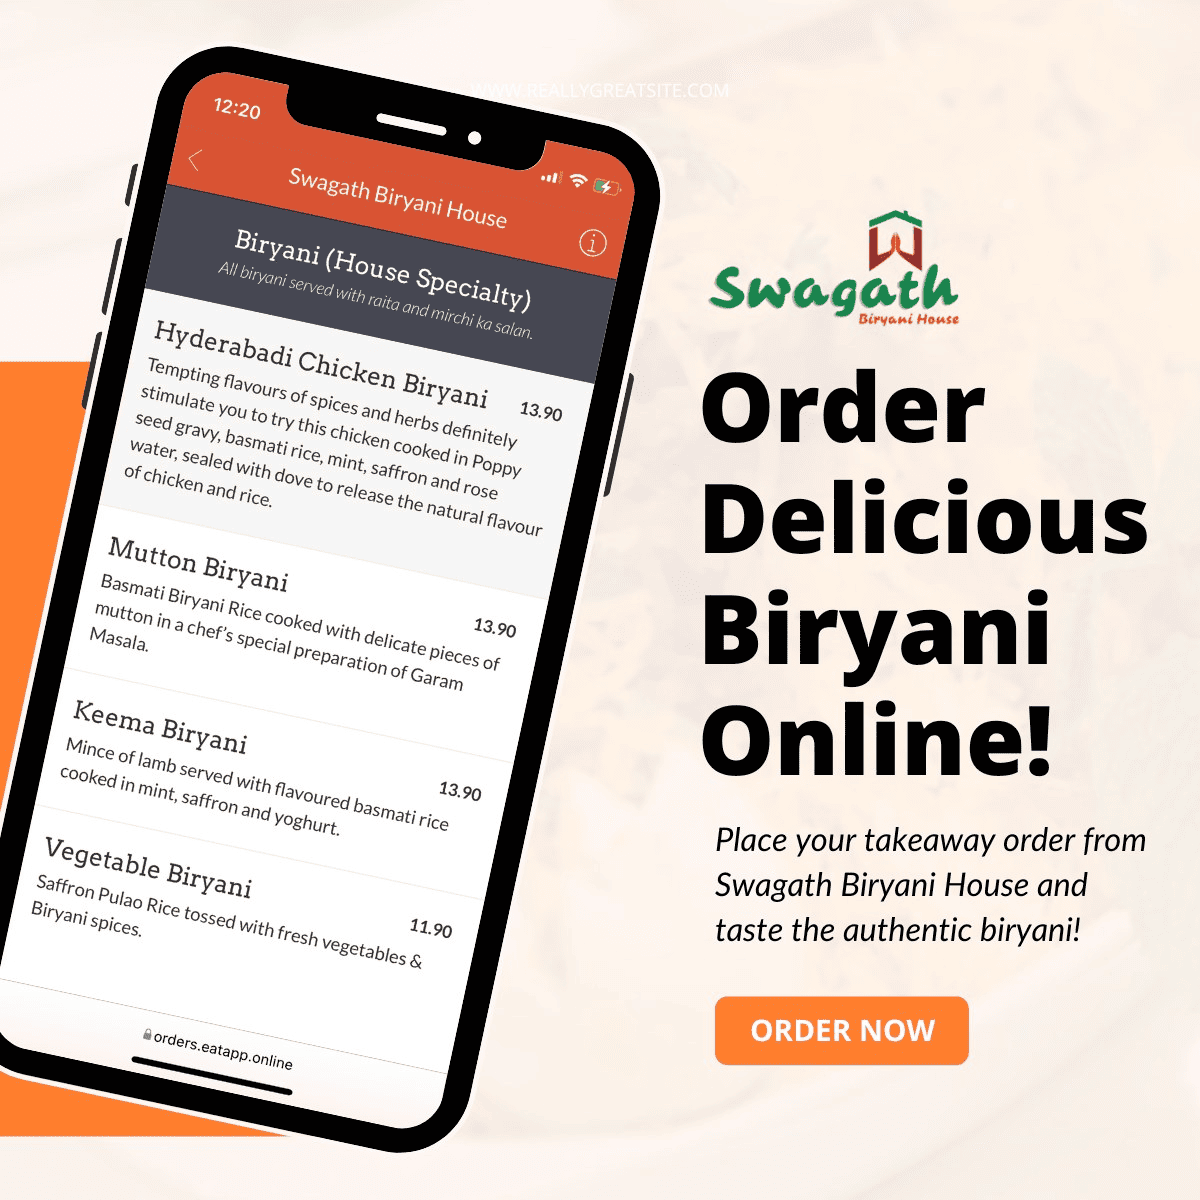 Ordering delicious food from Swagath Biryani House using their Mobile app or online ordering